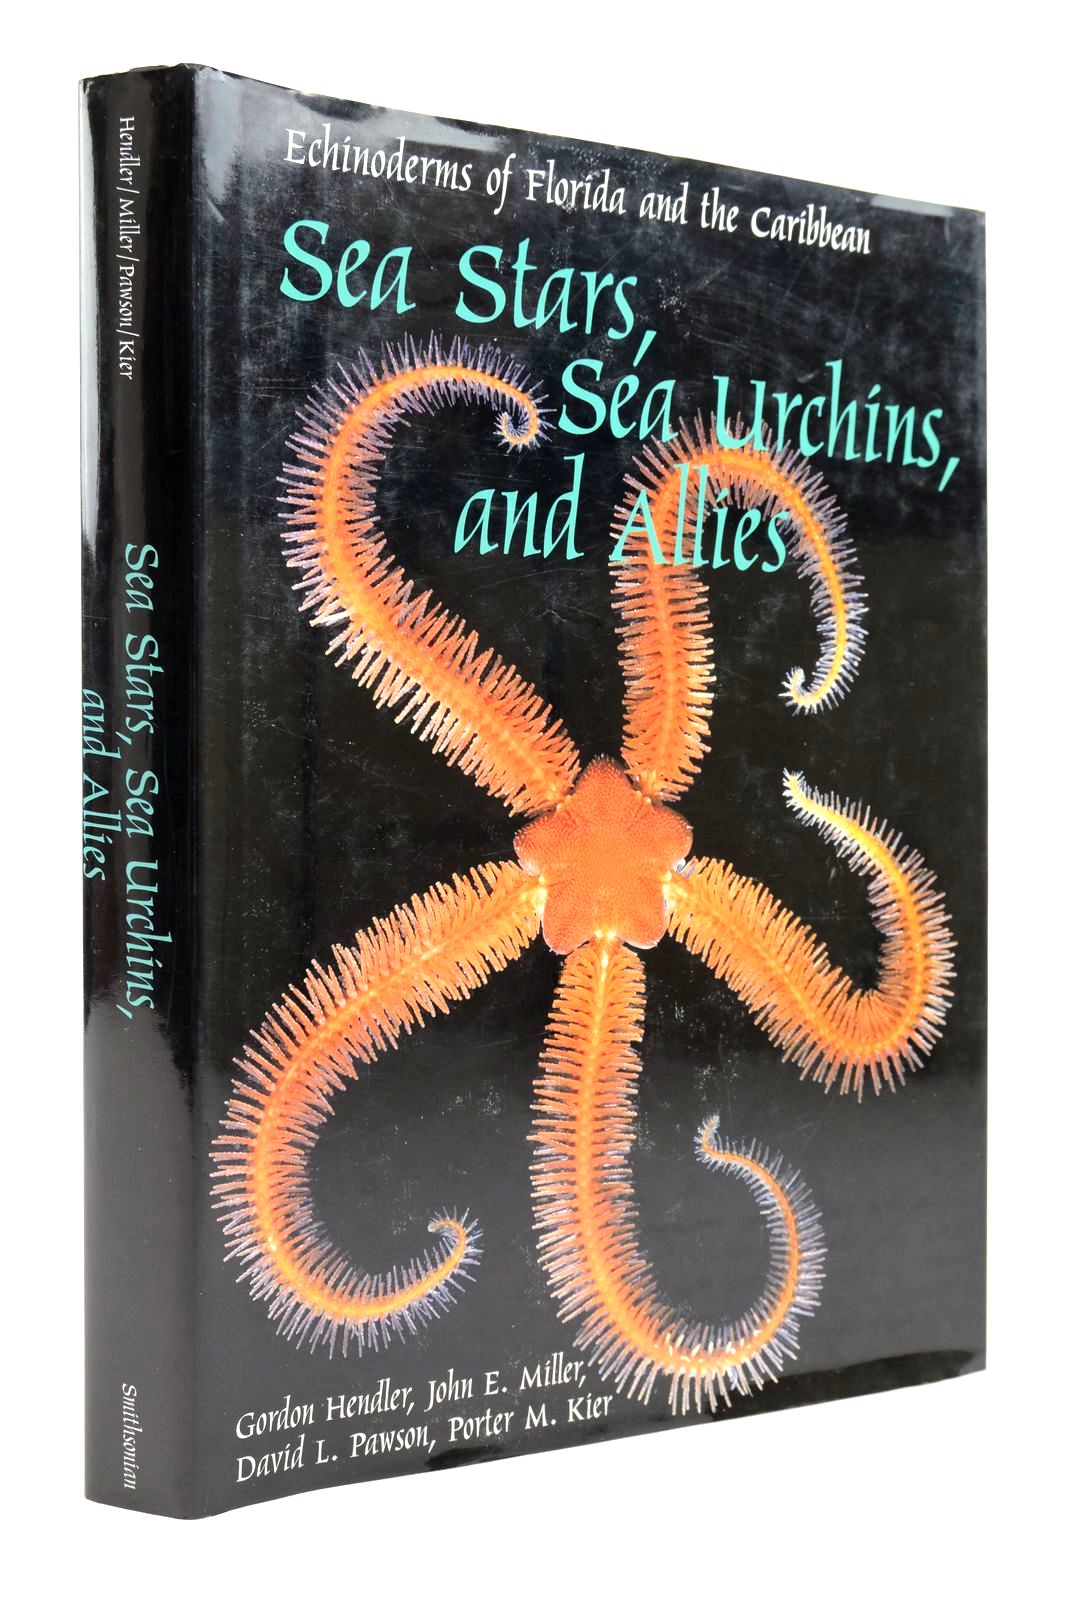 Photo of SEA STARS, SEA URCHINS, AND ALLIES: ACHINODERMS OF FLORIDA AND THE CARIBBEAN written by Hendler, Gordon Miller, John E. Pawson, David L. Kier, Porter M. published by Smithsonian Institution Press (STOCK CODE: 2139131)  for sale by Stella & Rose's Books